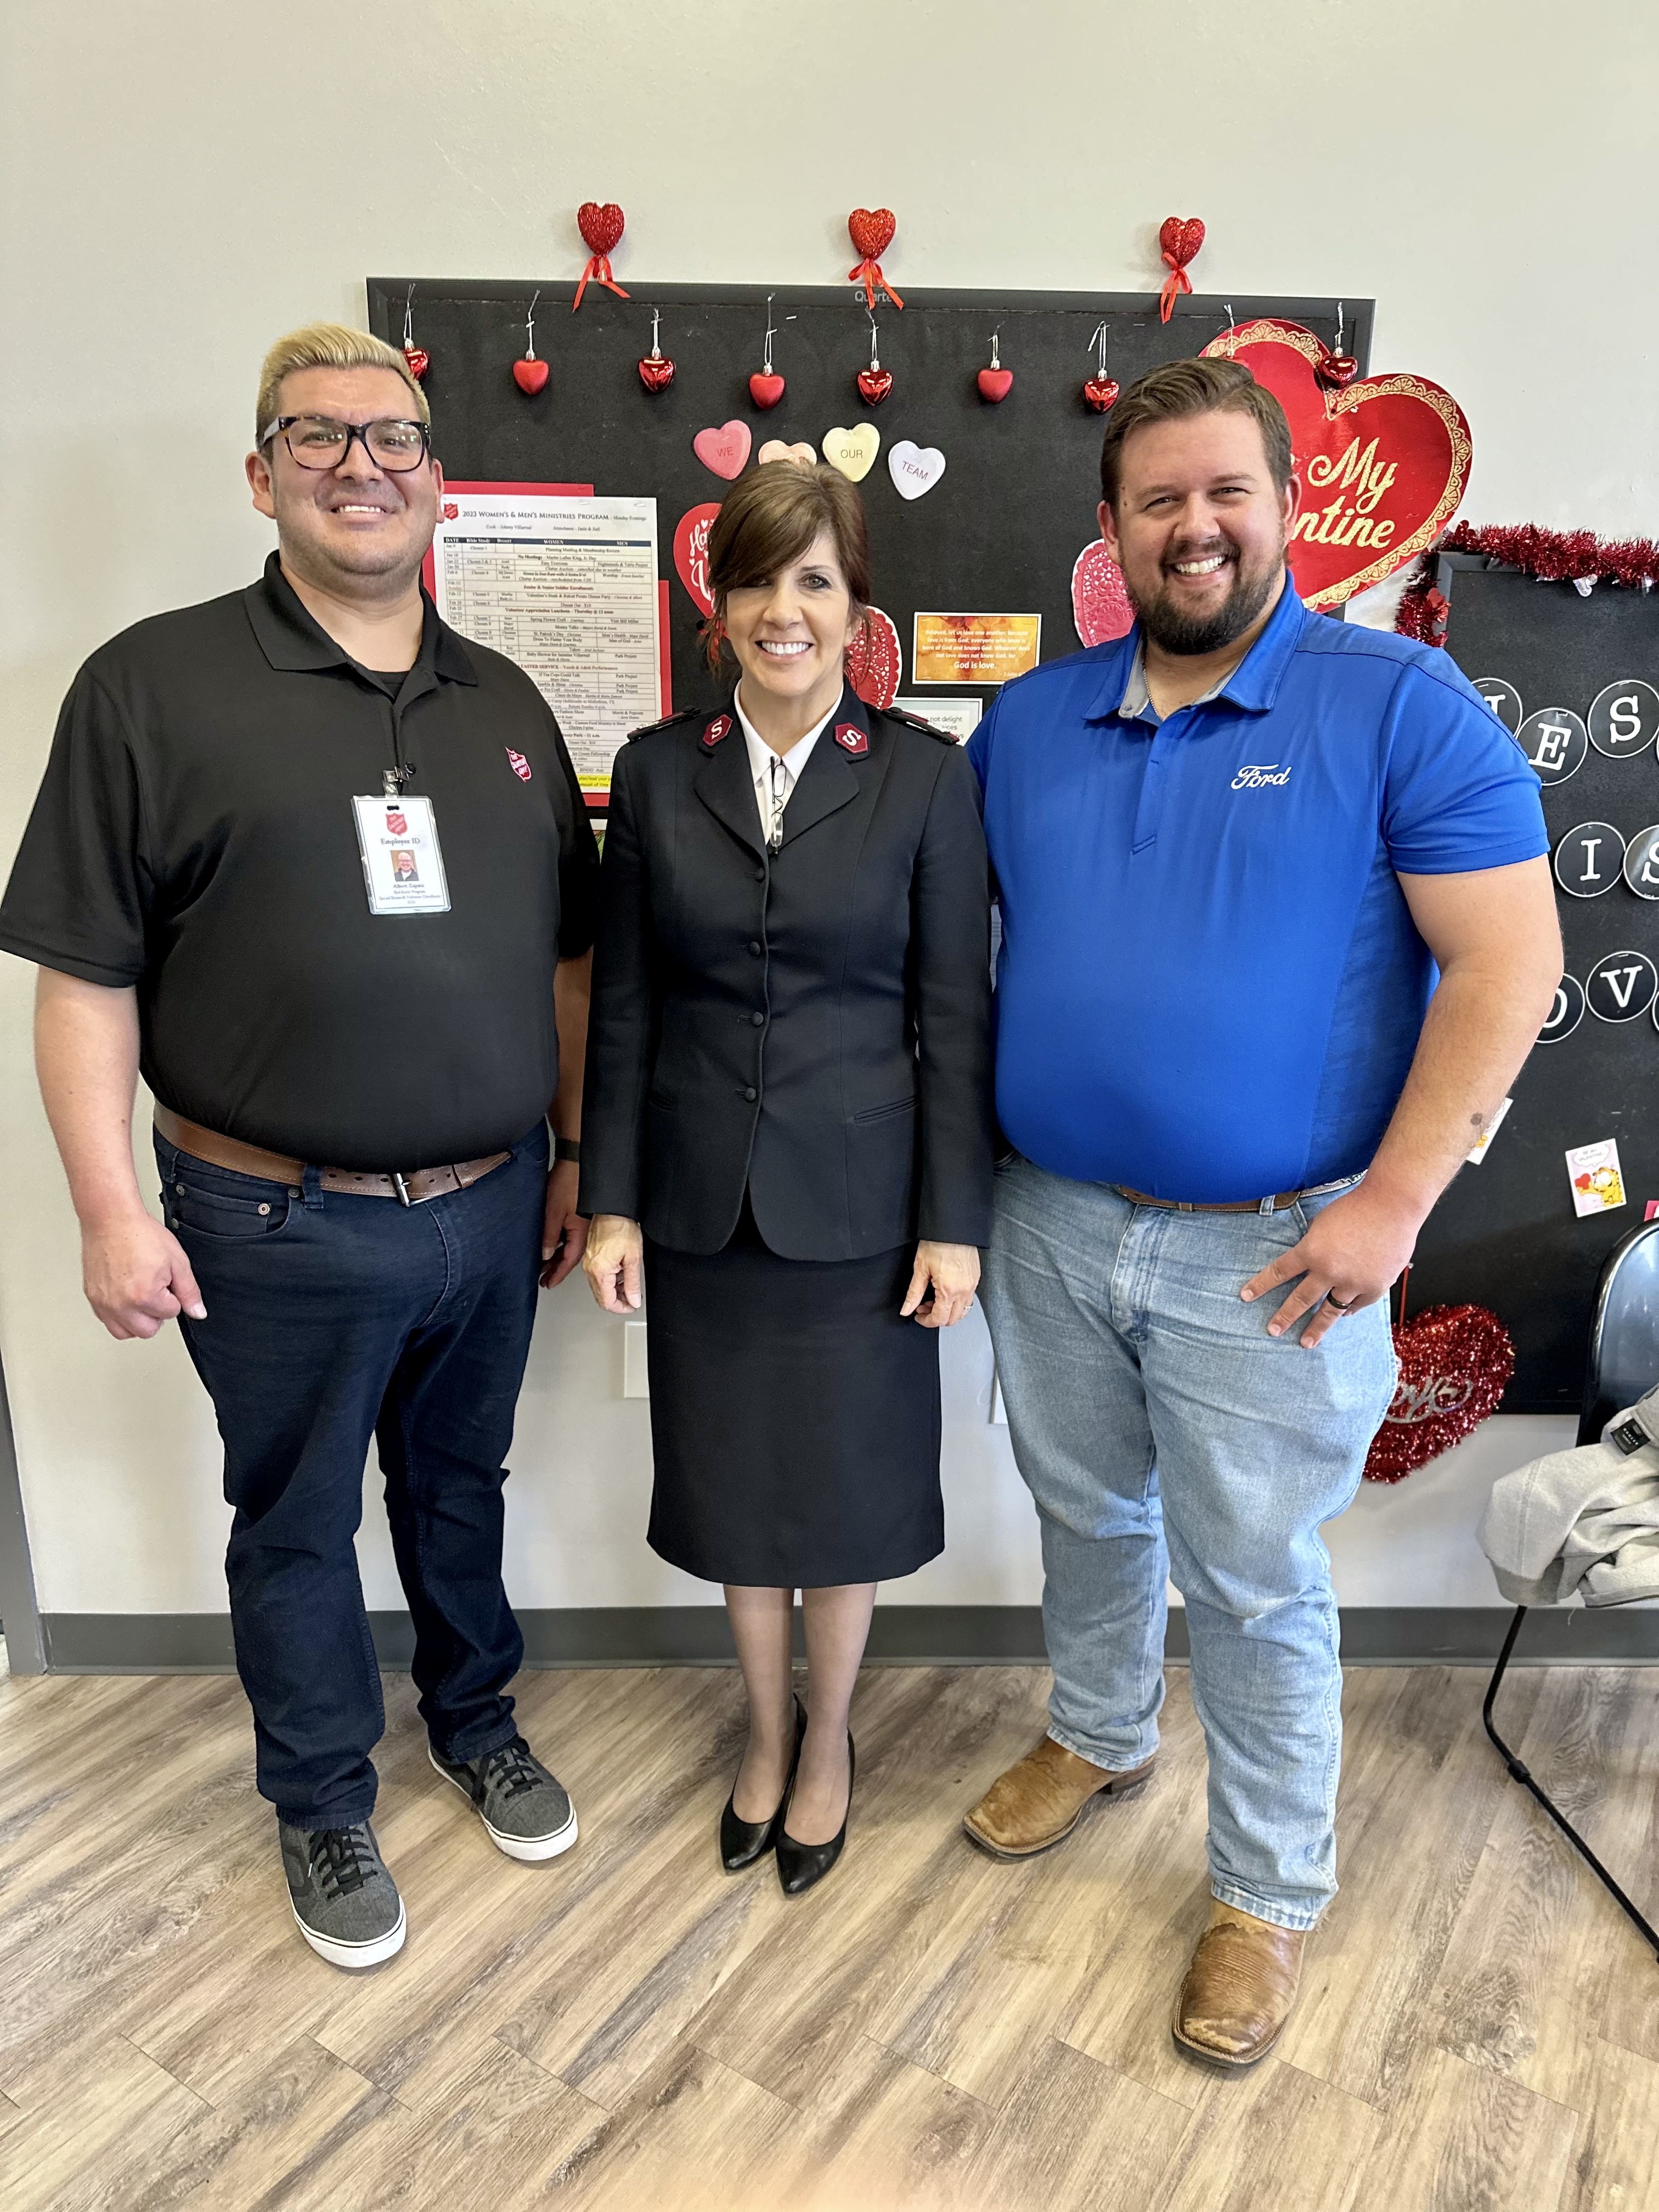 Gene Messer Ford is proud to support The Salvation Army Texas South Plains!